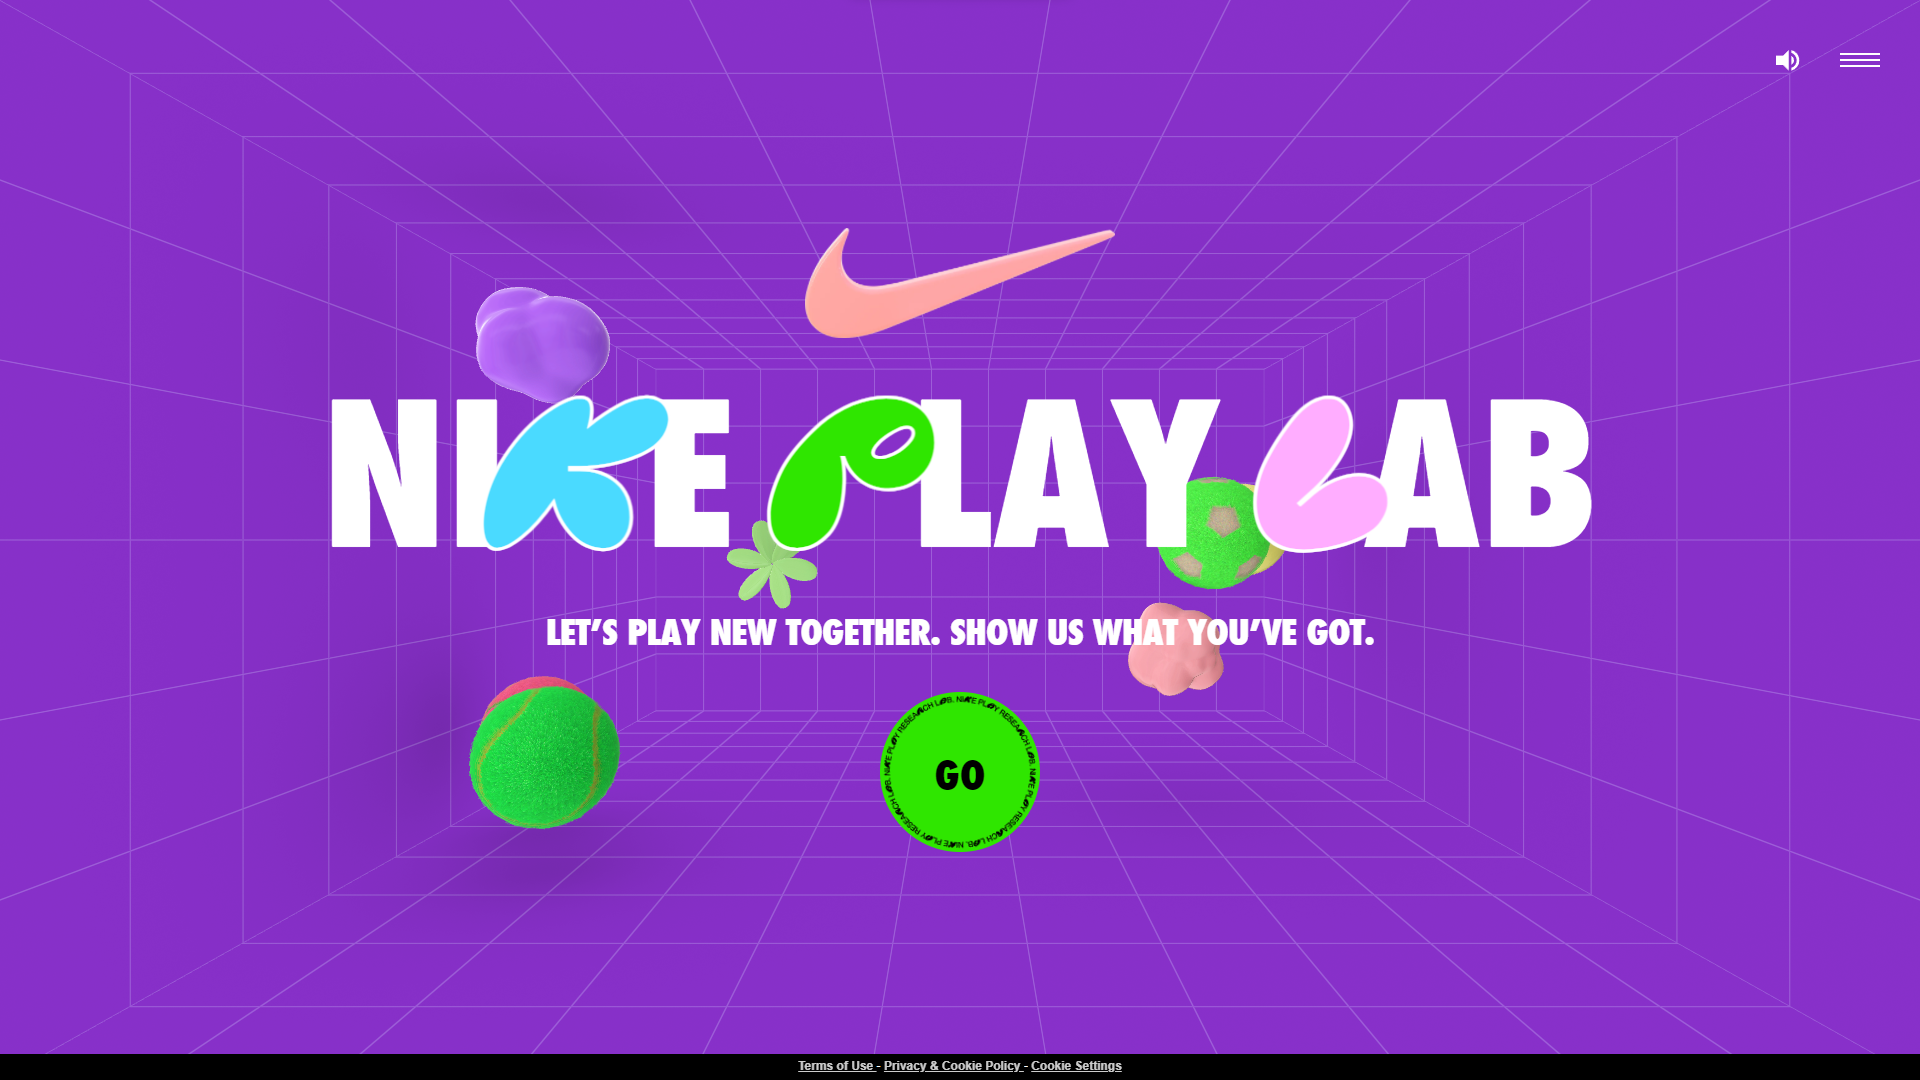 Nike playlab all winners colorful